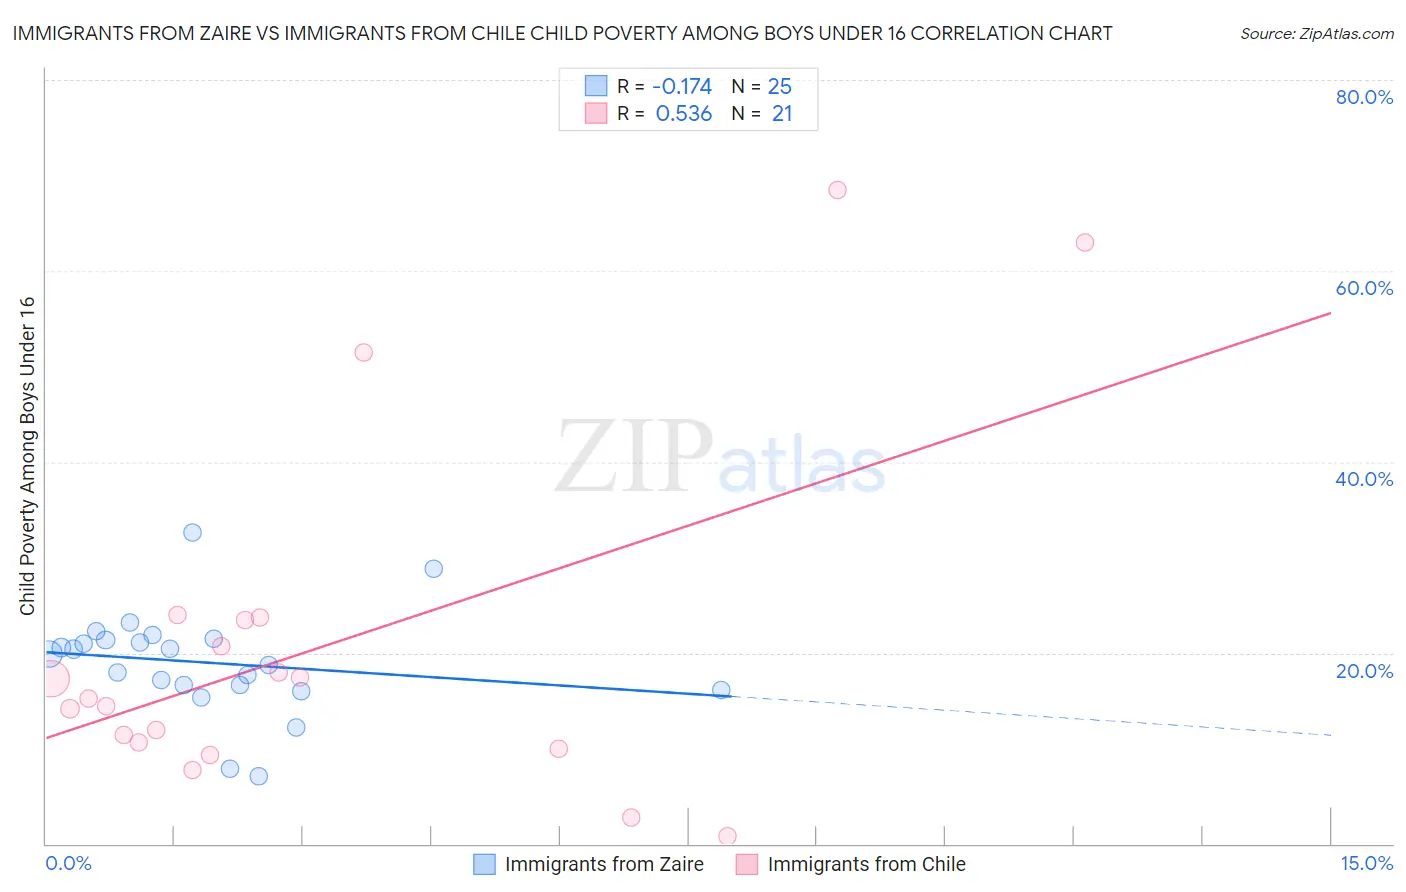 Immigrants from Zaire vs Immigrants from Chile Child Poverty Among Boys Under 16